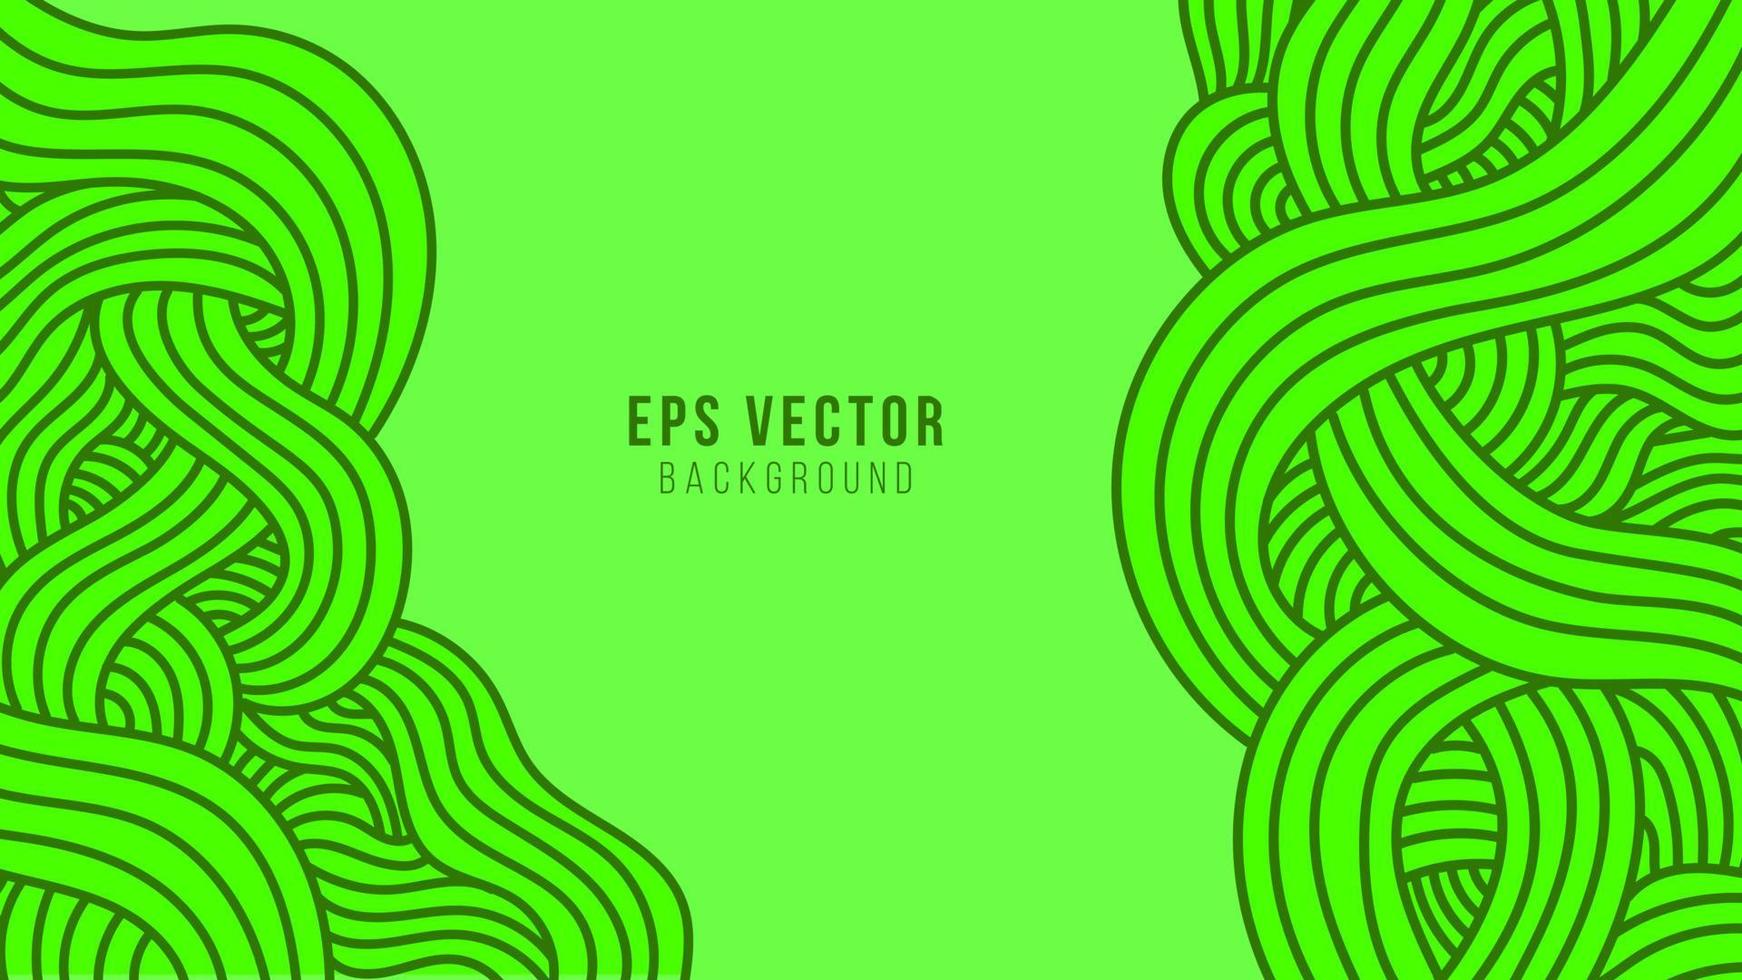 Green wavy lines abstract background with hand drawn outline style. can use for poster, business banner, flyer, advertisement, brochure, catalog, web, site, website, presentation, book cover, leaflet vector